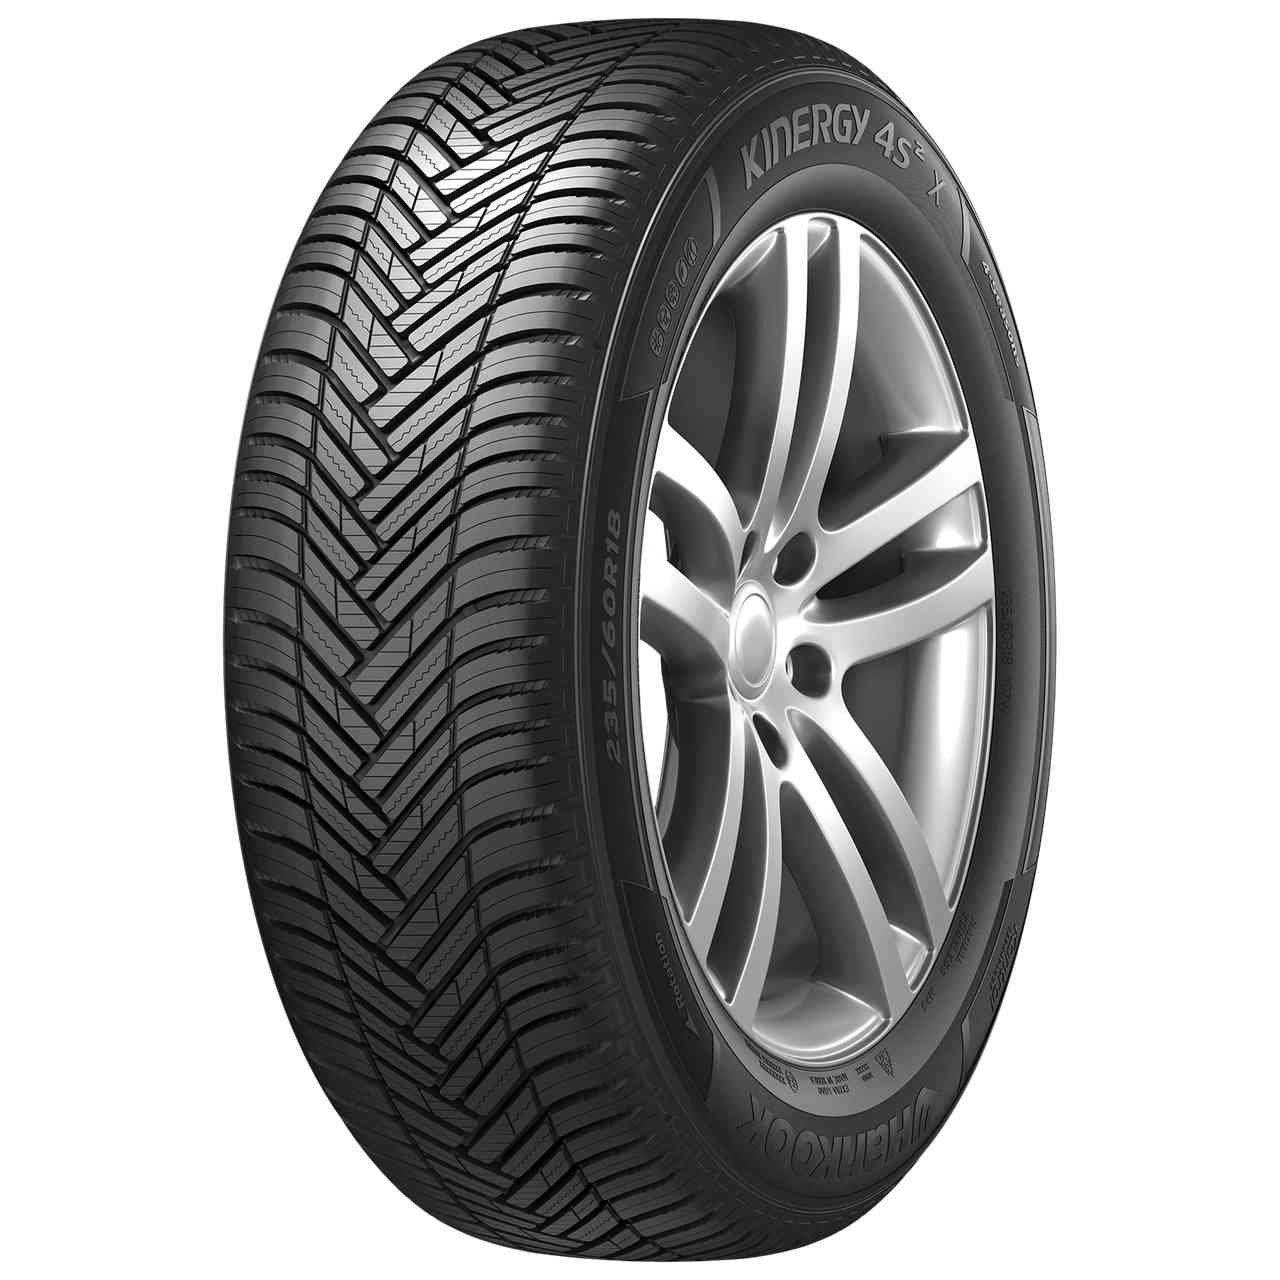 HANKOOK KINERGY 4S 2 X (H750A) 215/55R18 99V BSW XL